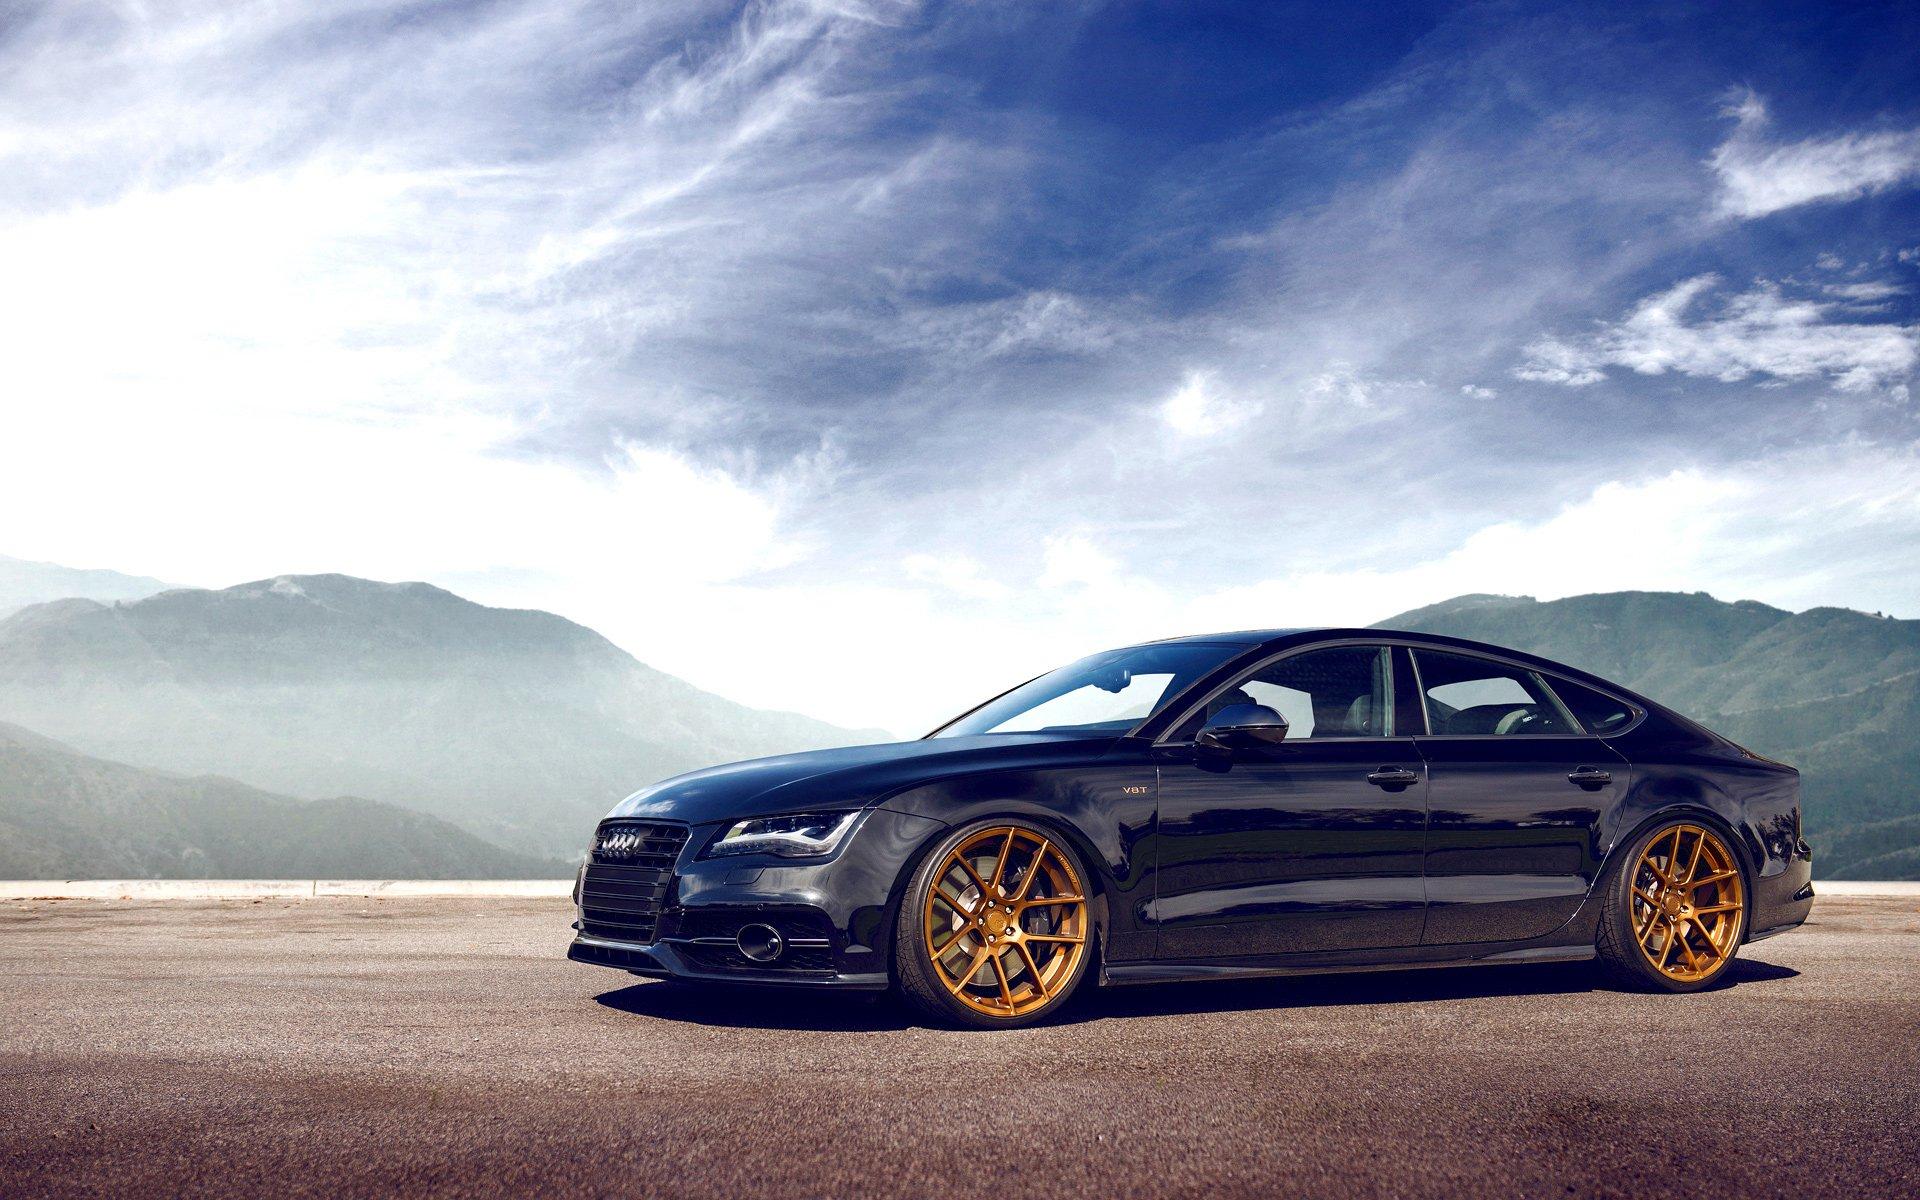 Audi A7 HD Wallpaper and Background Image